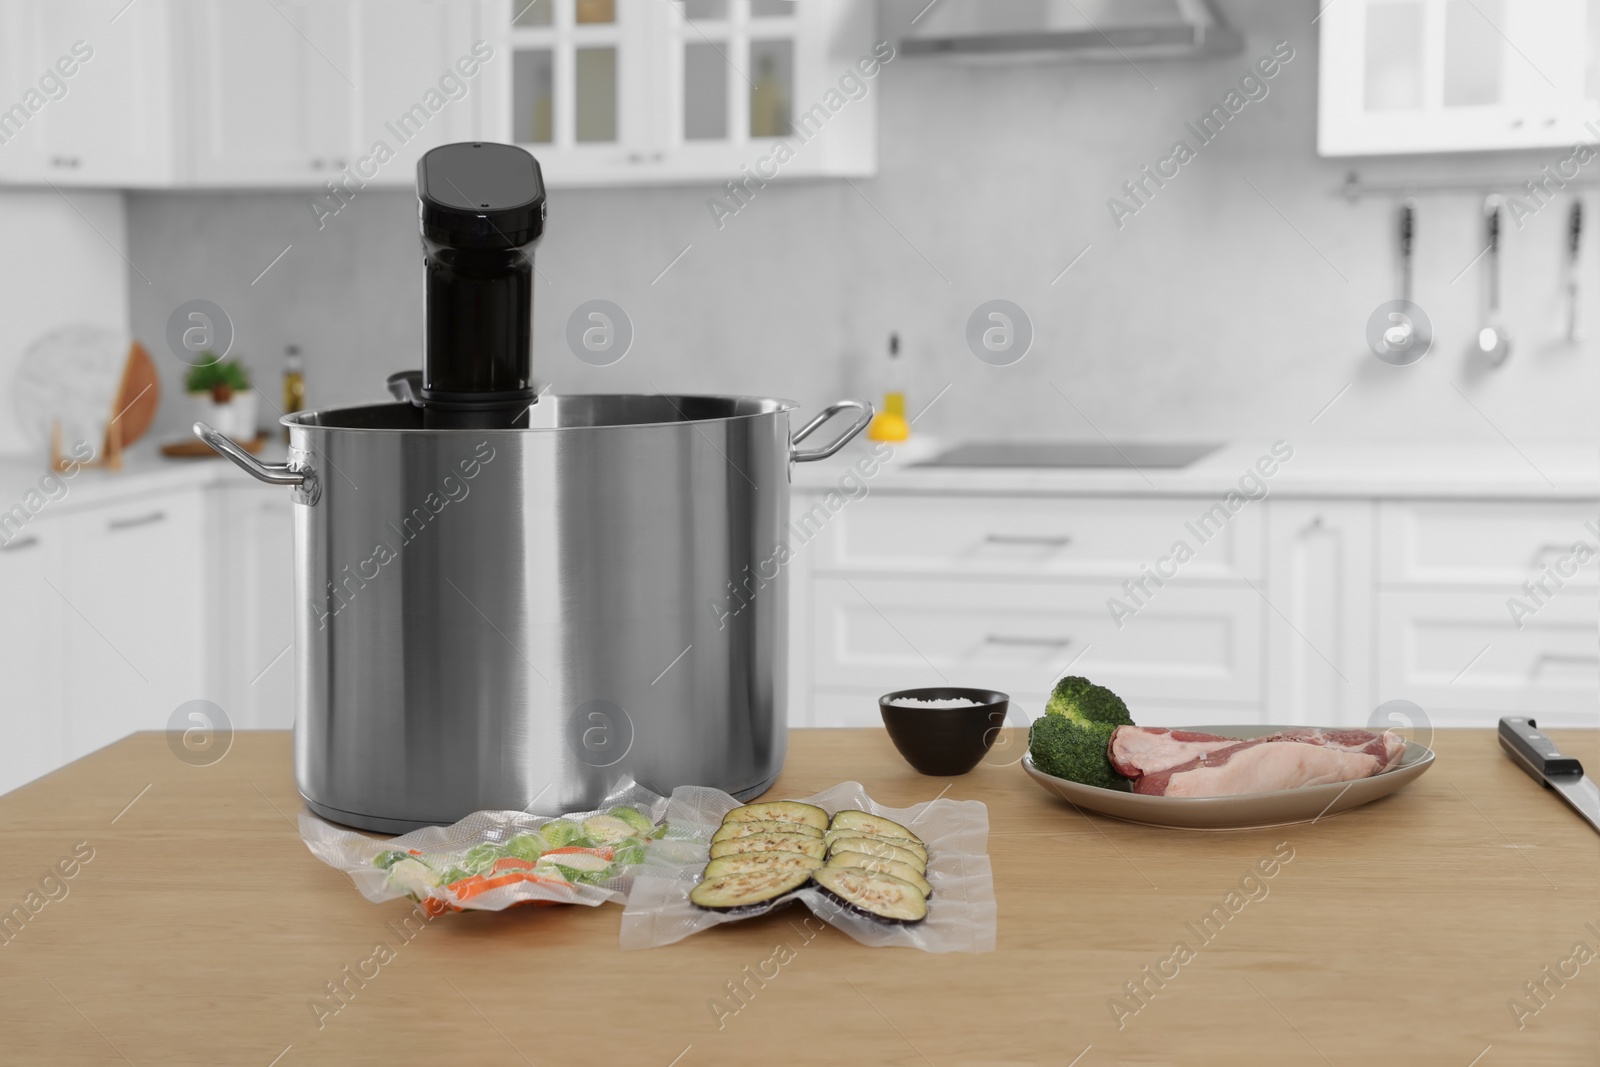 Photo of Pot with sous vide cooker, vacuum packed vegetables and ingredients on table in kitchen. Thermal immersion circulator